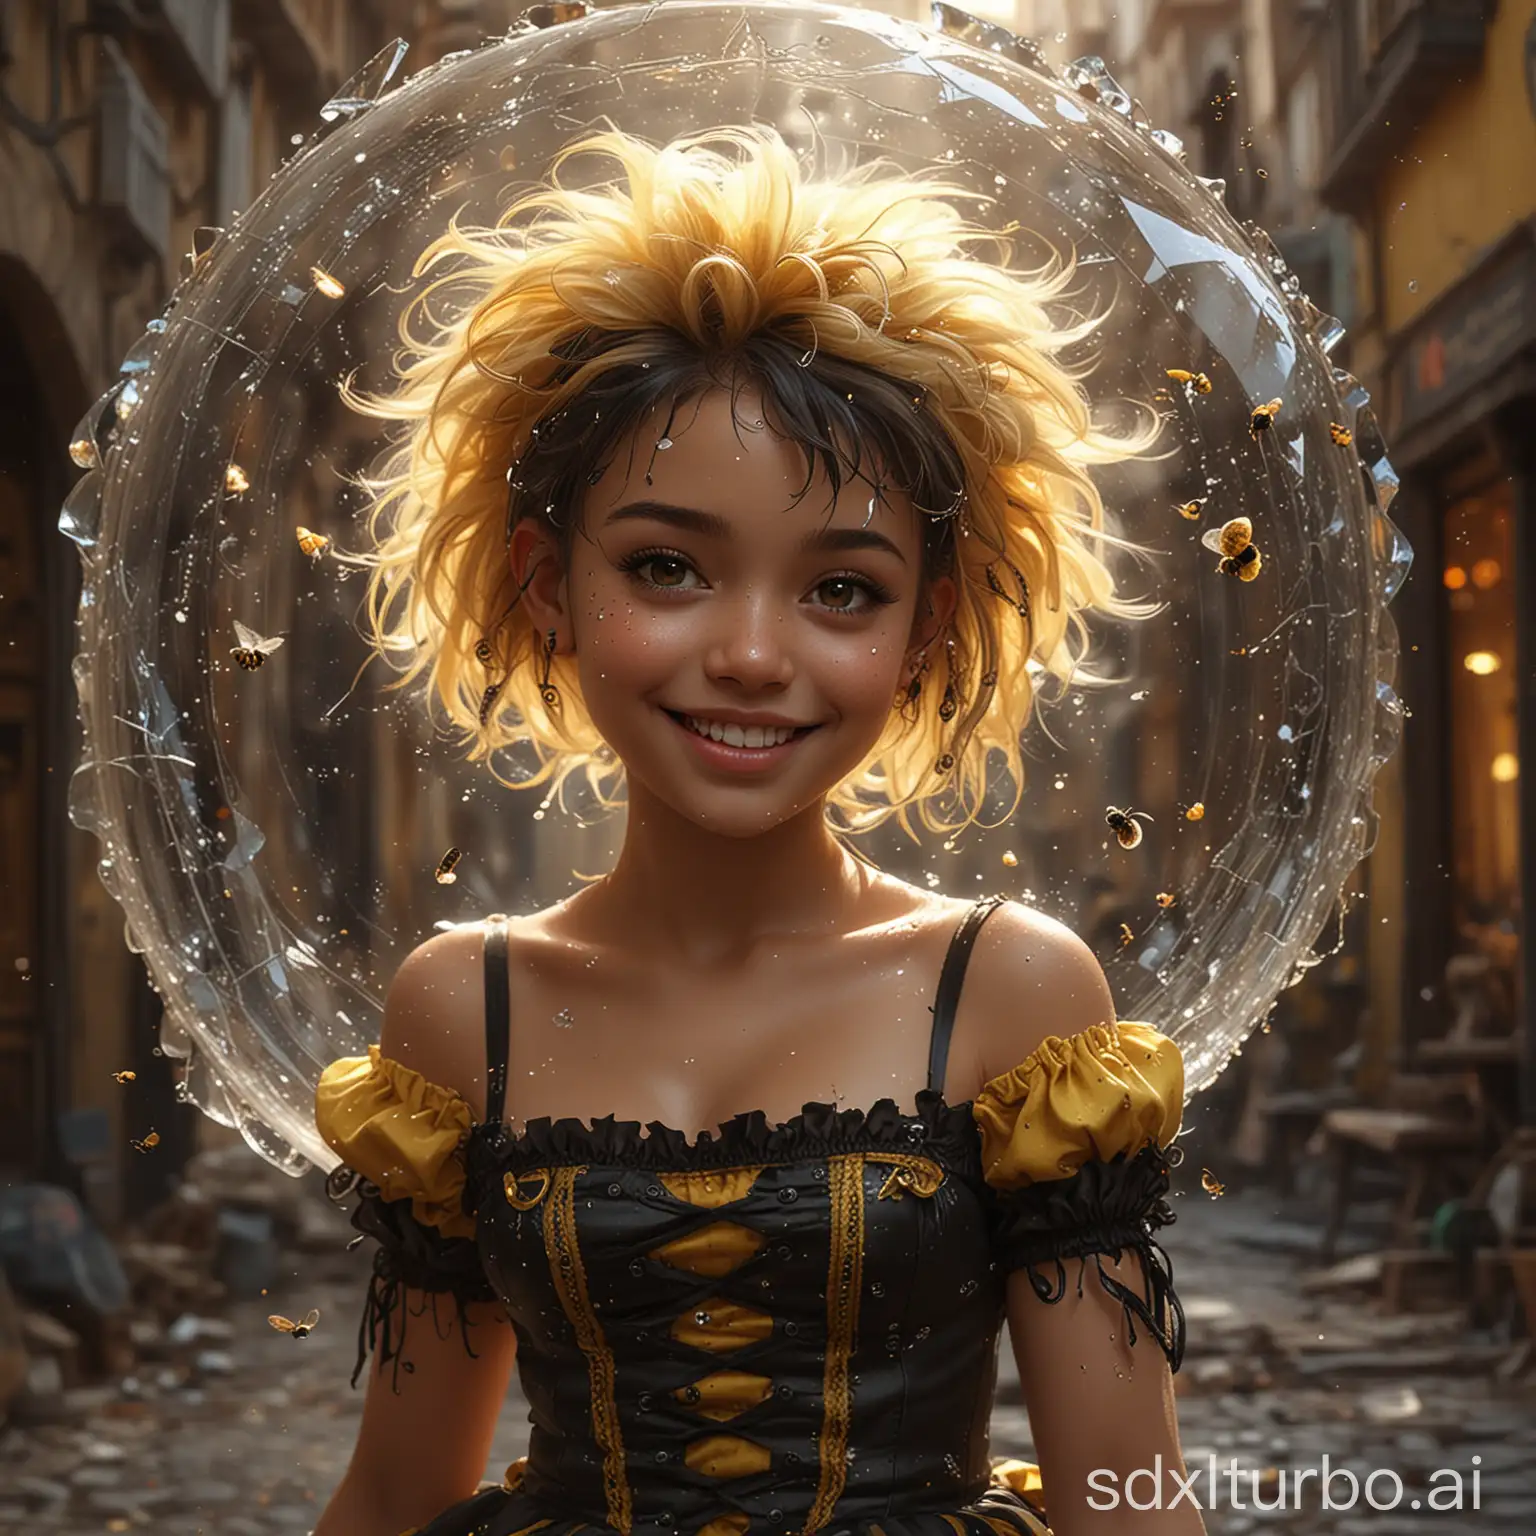 cute little women 20 yaers old in honey bee carnival dress, tanned skin,
happy smile,full body, luis royo house an ultra hd detailed painting, digital art,shaggy upswept black-yellow hair, 
realistic, Art by Daniela Uhlig and Tatiana Suarez, a tattooed punk beauty, bright, smile, cute little baby girl honey bee dress beautiful, splash,
Glittering, cute and adorable, filigree, 
rim lighting, lights, extremely, magic,
surreal, fantasy, digital art, wlop, Broken Glass effect, stunning